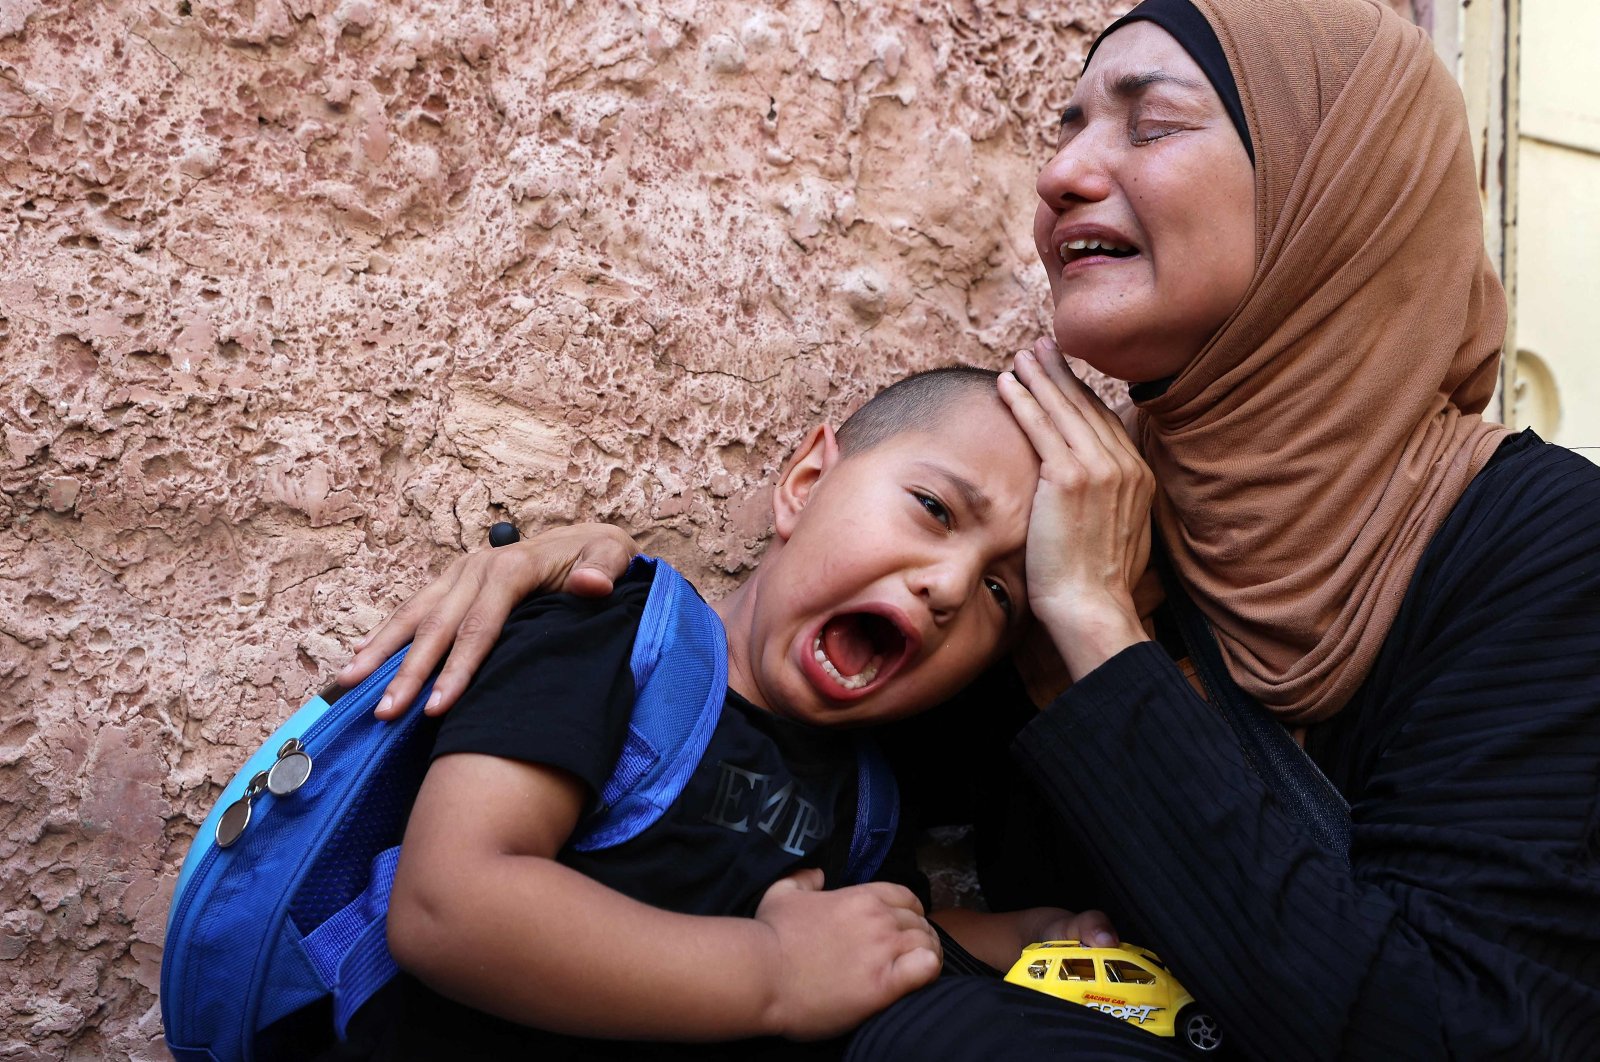 Family members cry during the funeral of a Palestinian man killed in an Israeli military raid in the occupied West Bank, Palestine, Aug. 17, 2023. (AFP Photo)